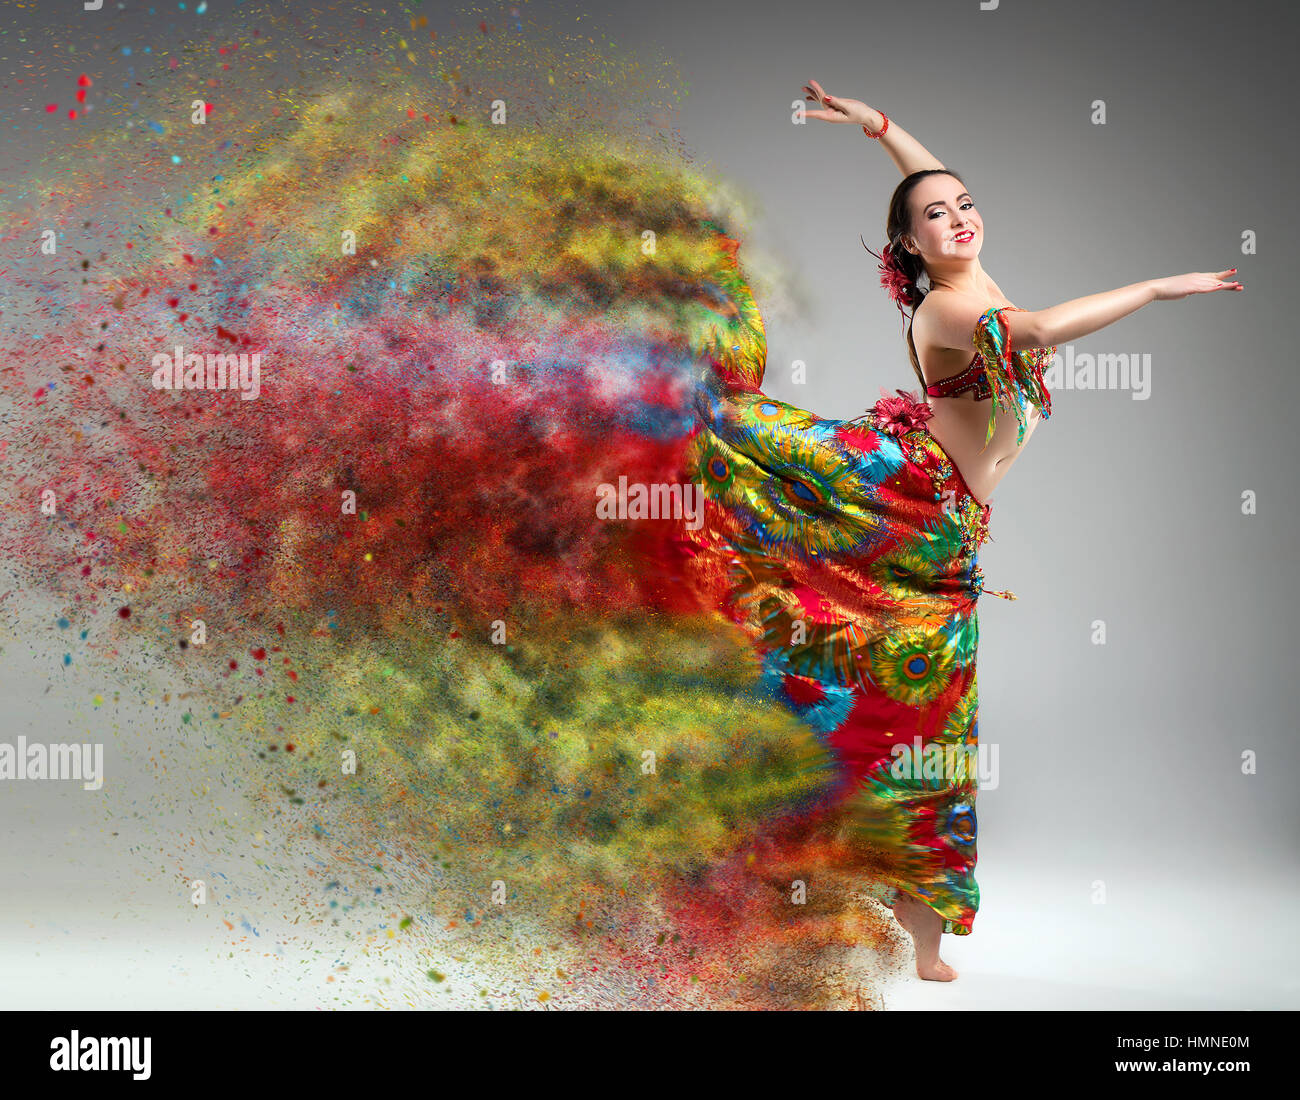 Dancer with disintegrating dress. Abstract vision.Photo manipulation Stock Photo